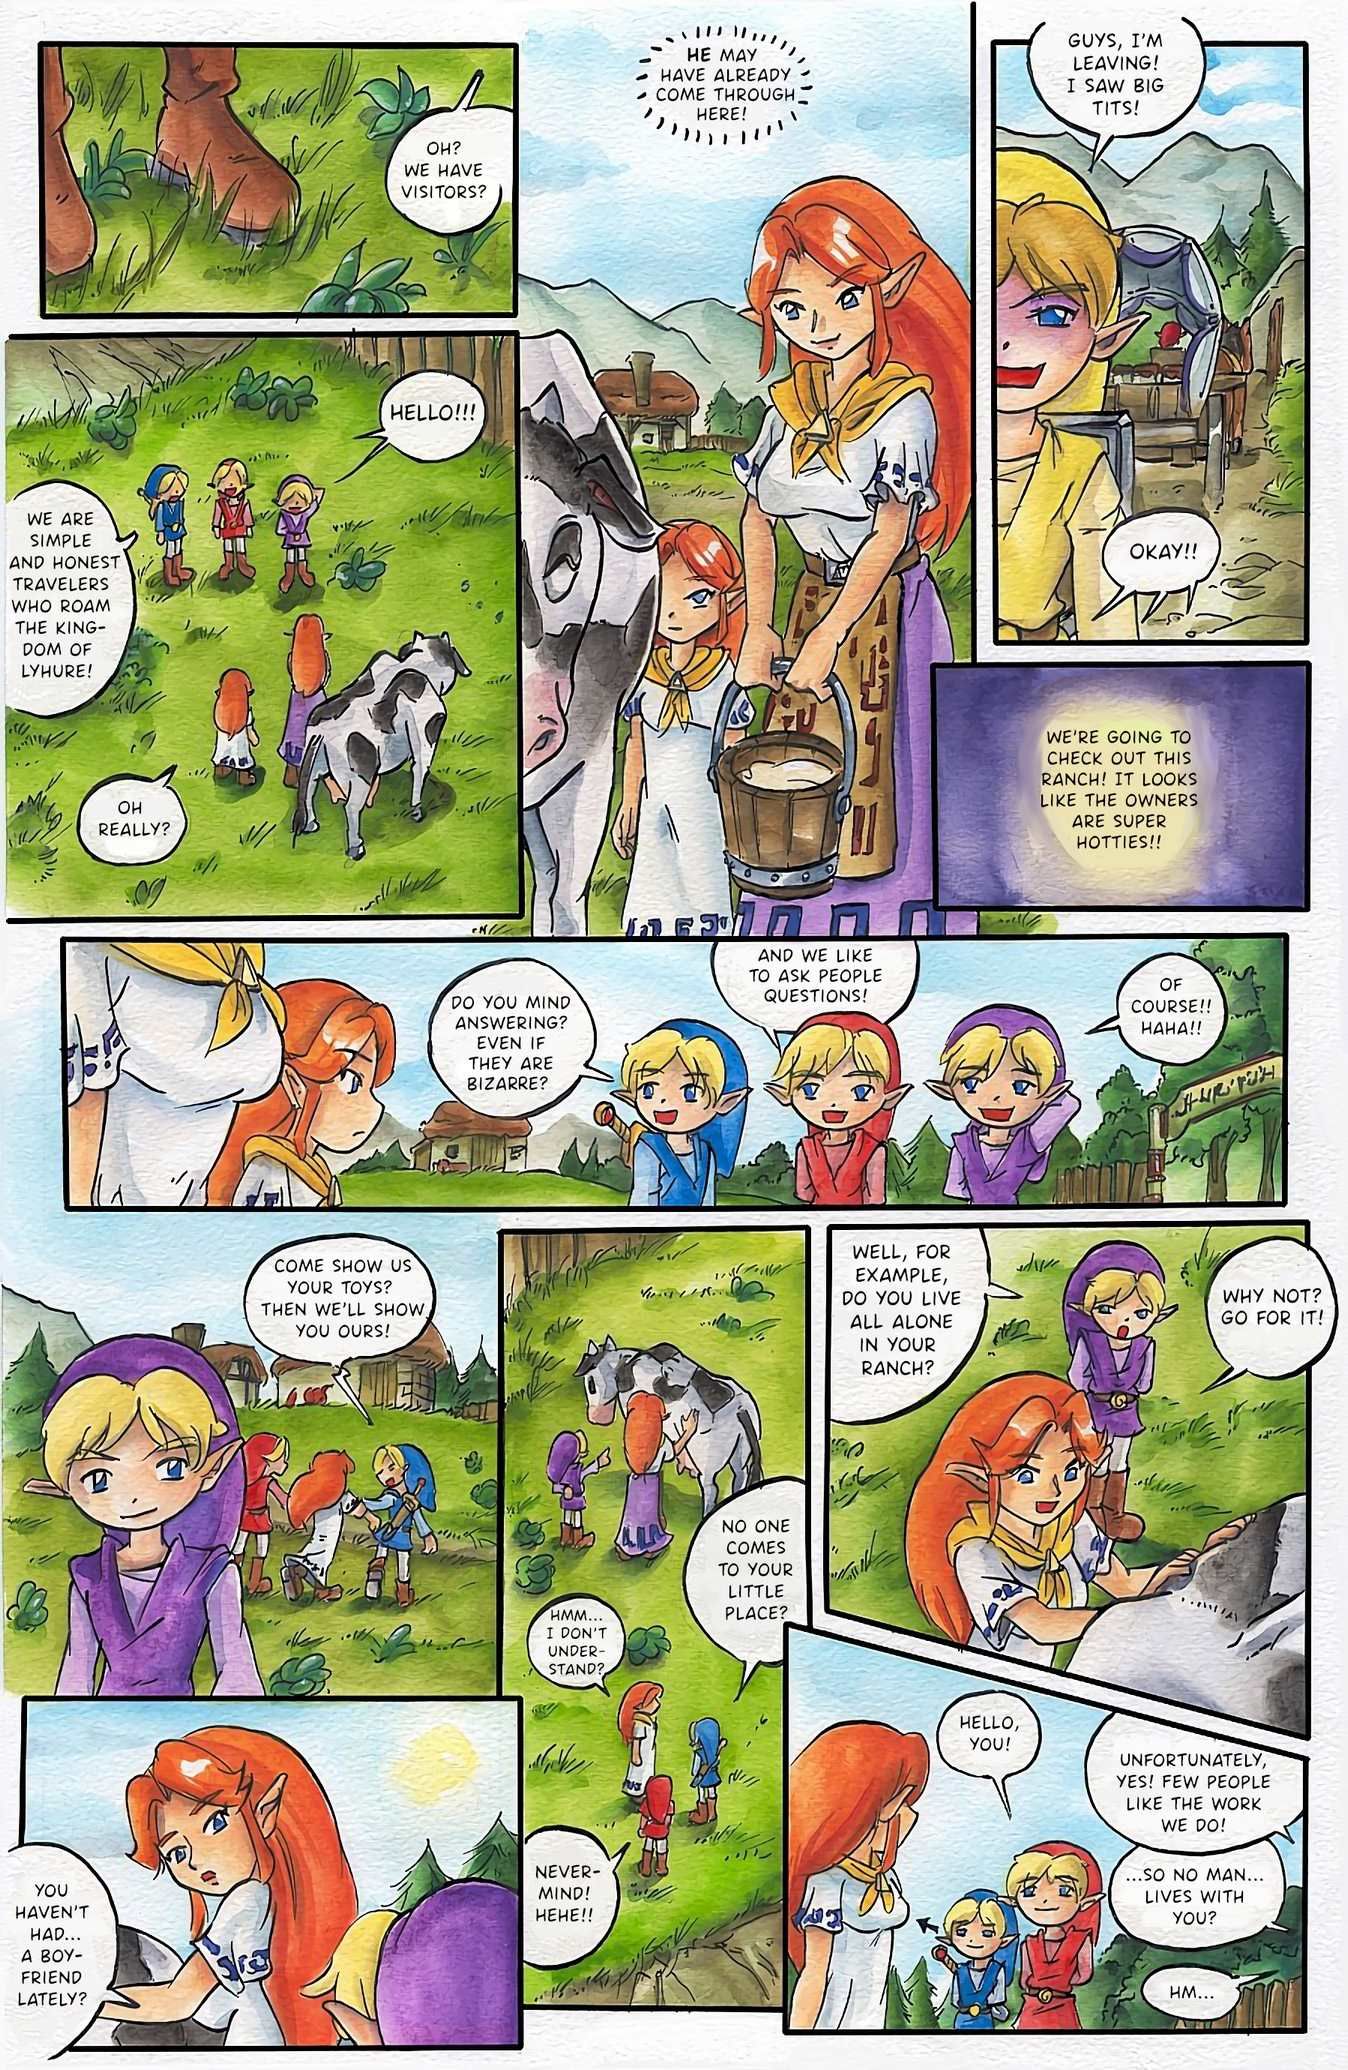 Sword page 3